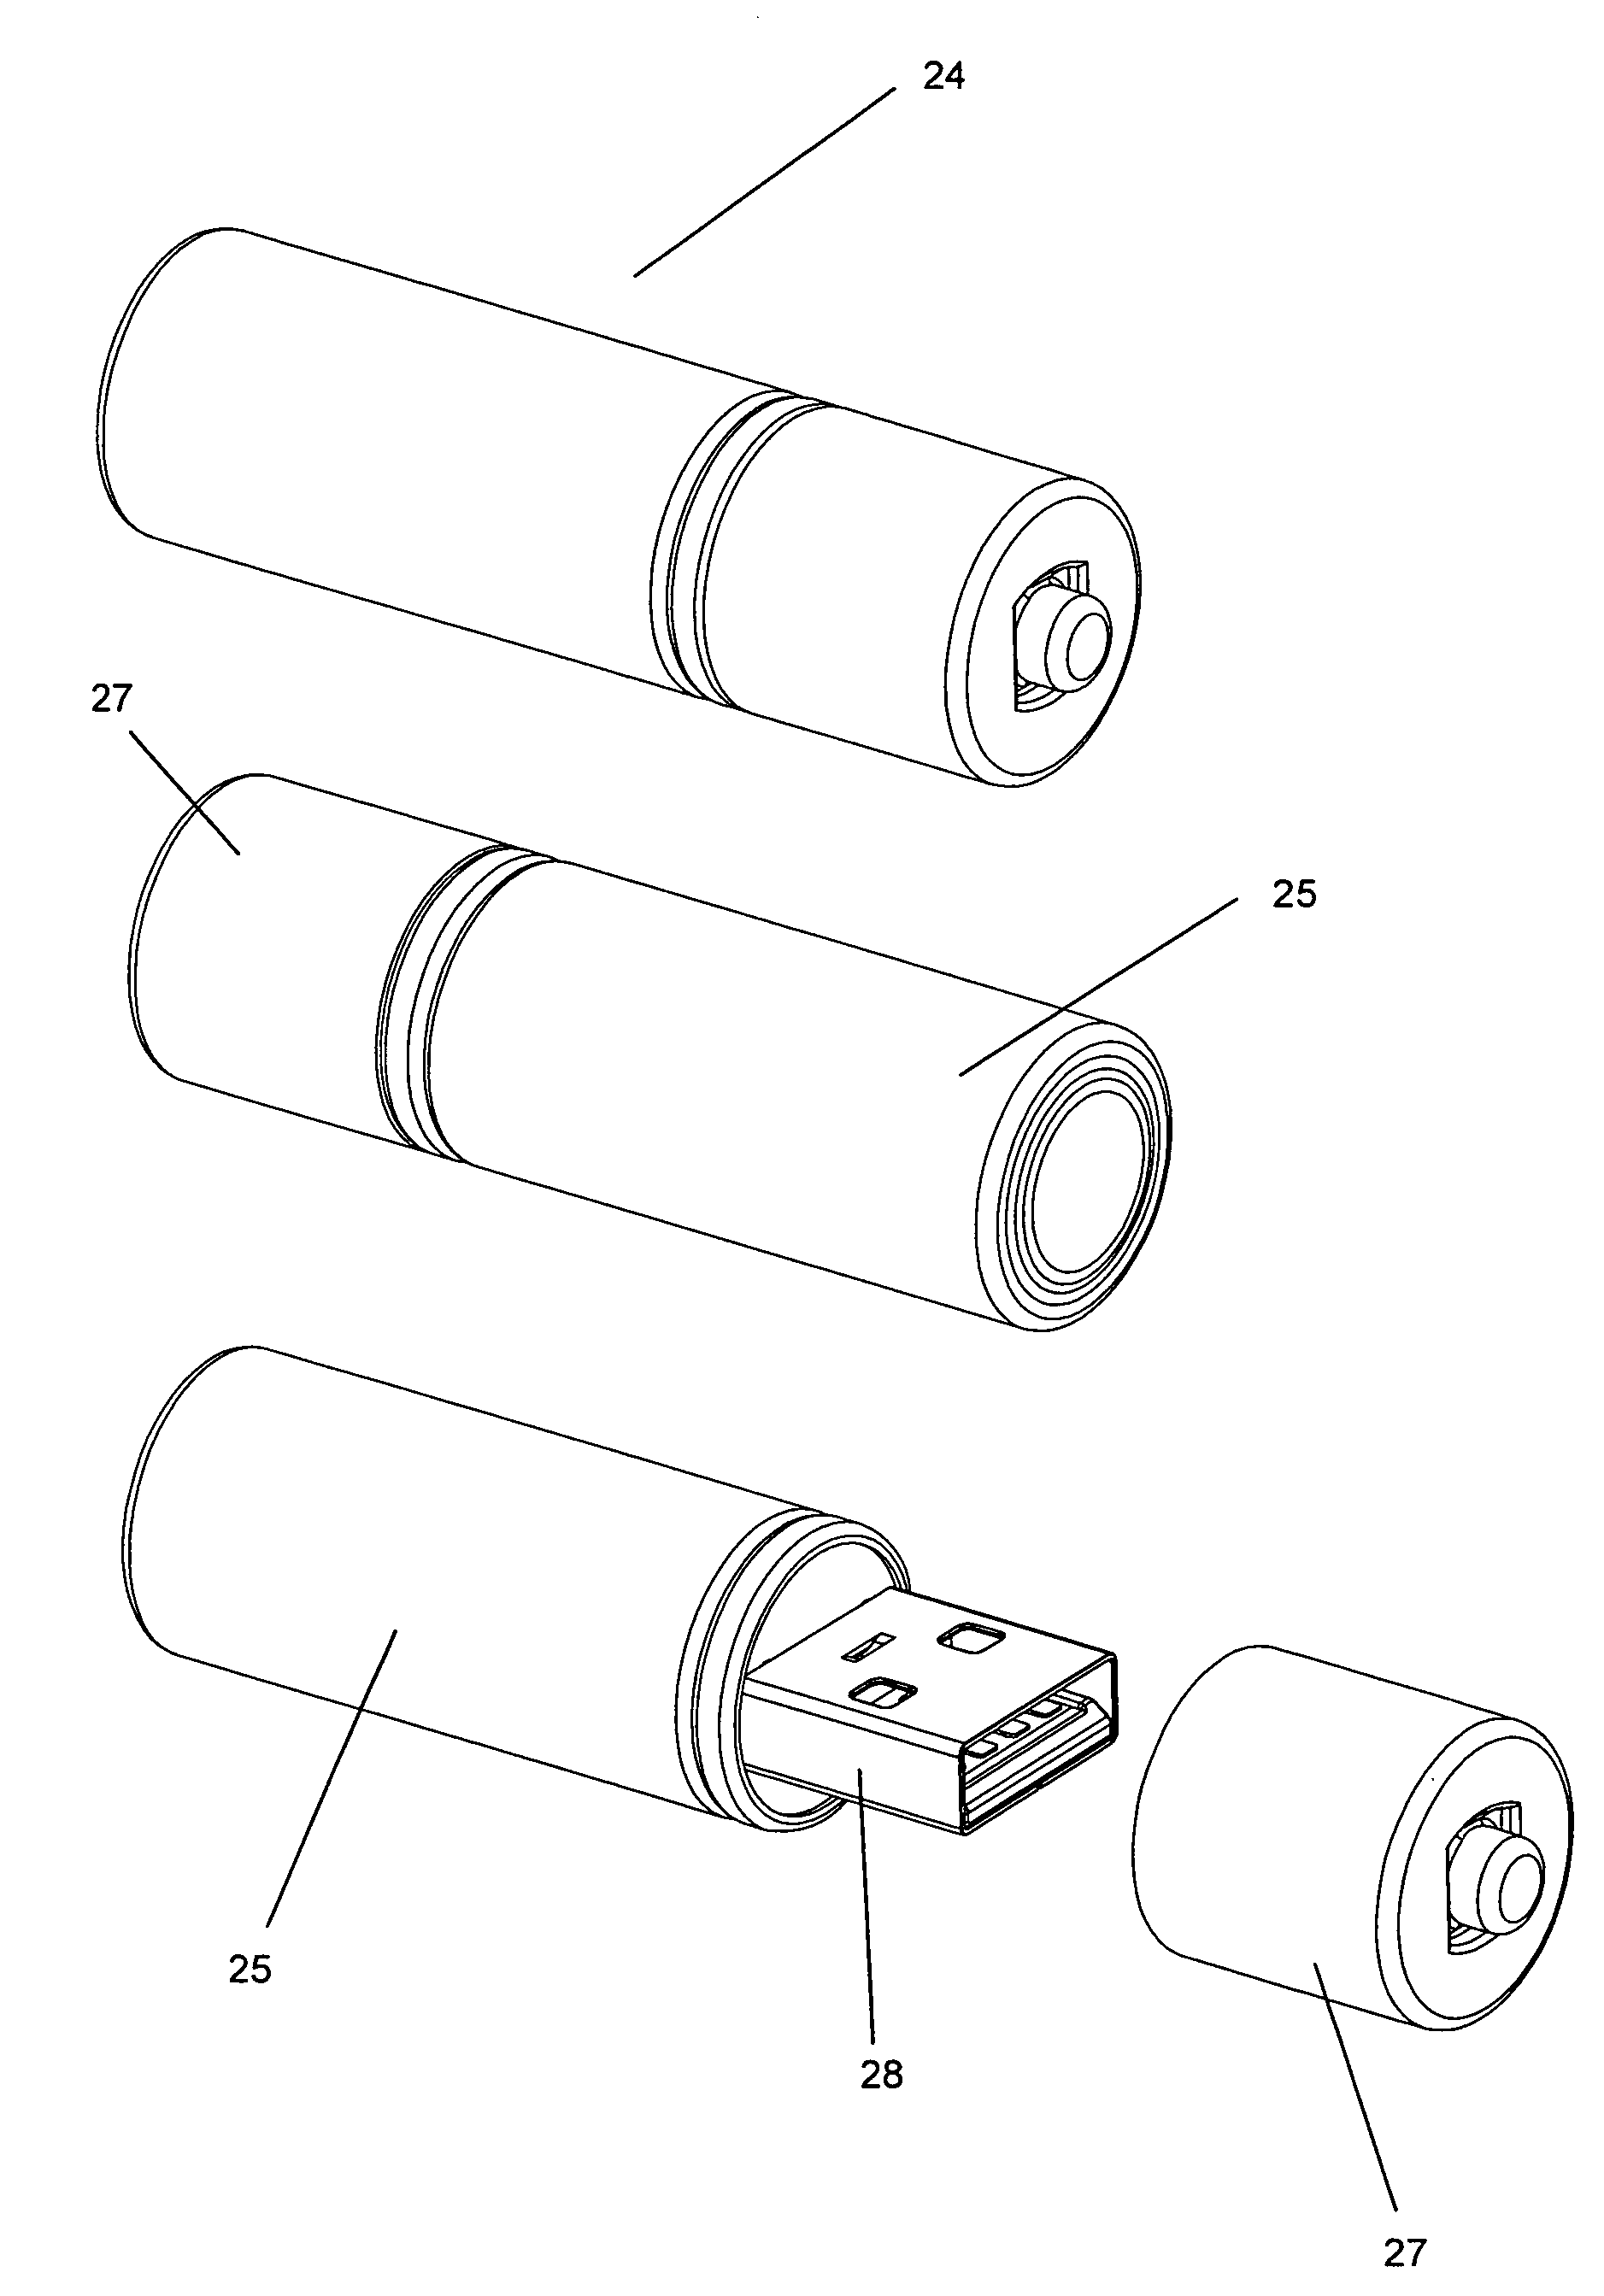 Rechargeable battery assembly having a data and power connector plug